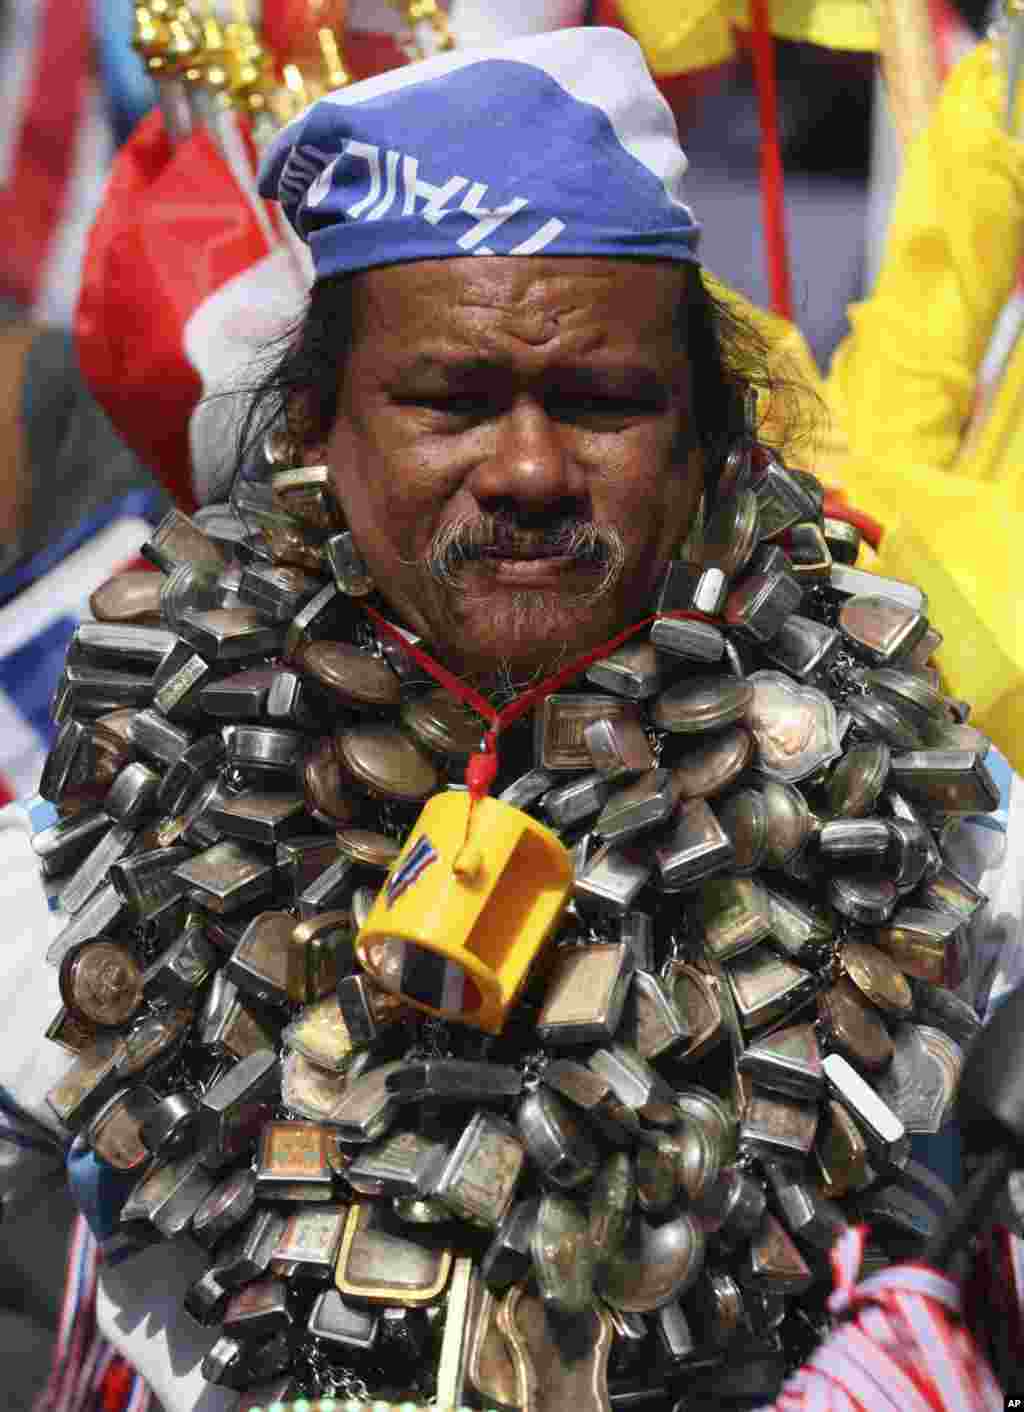 An anti-government protester has Buddhist amulets around his neck as he takes part in a rally, in Bangkok, Thailand. 